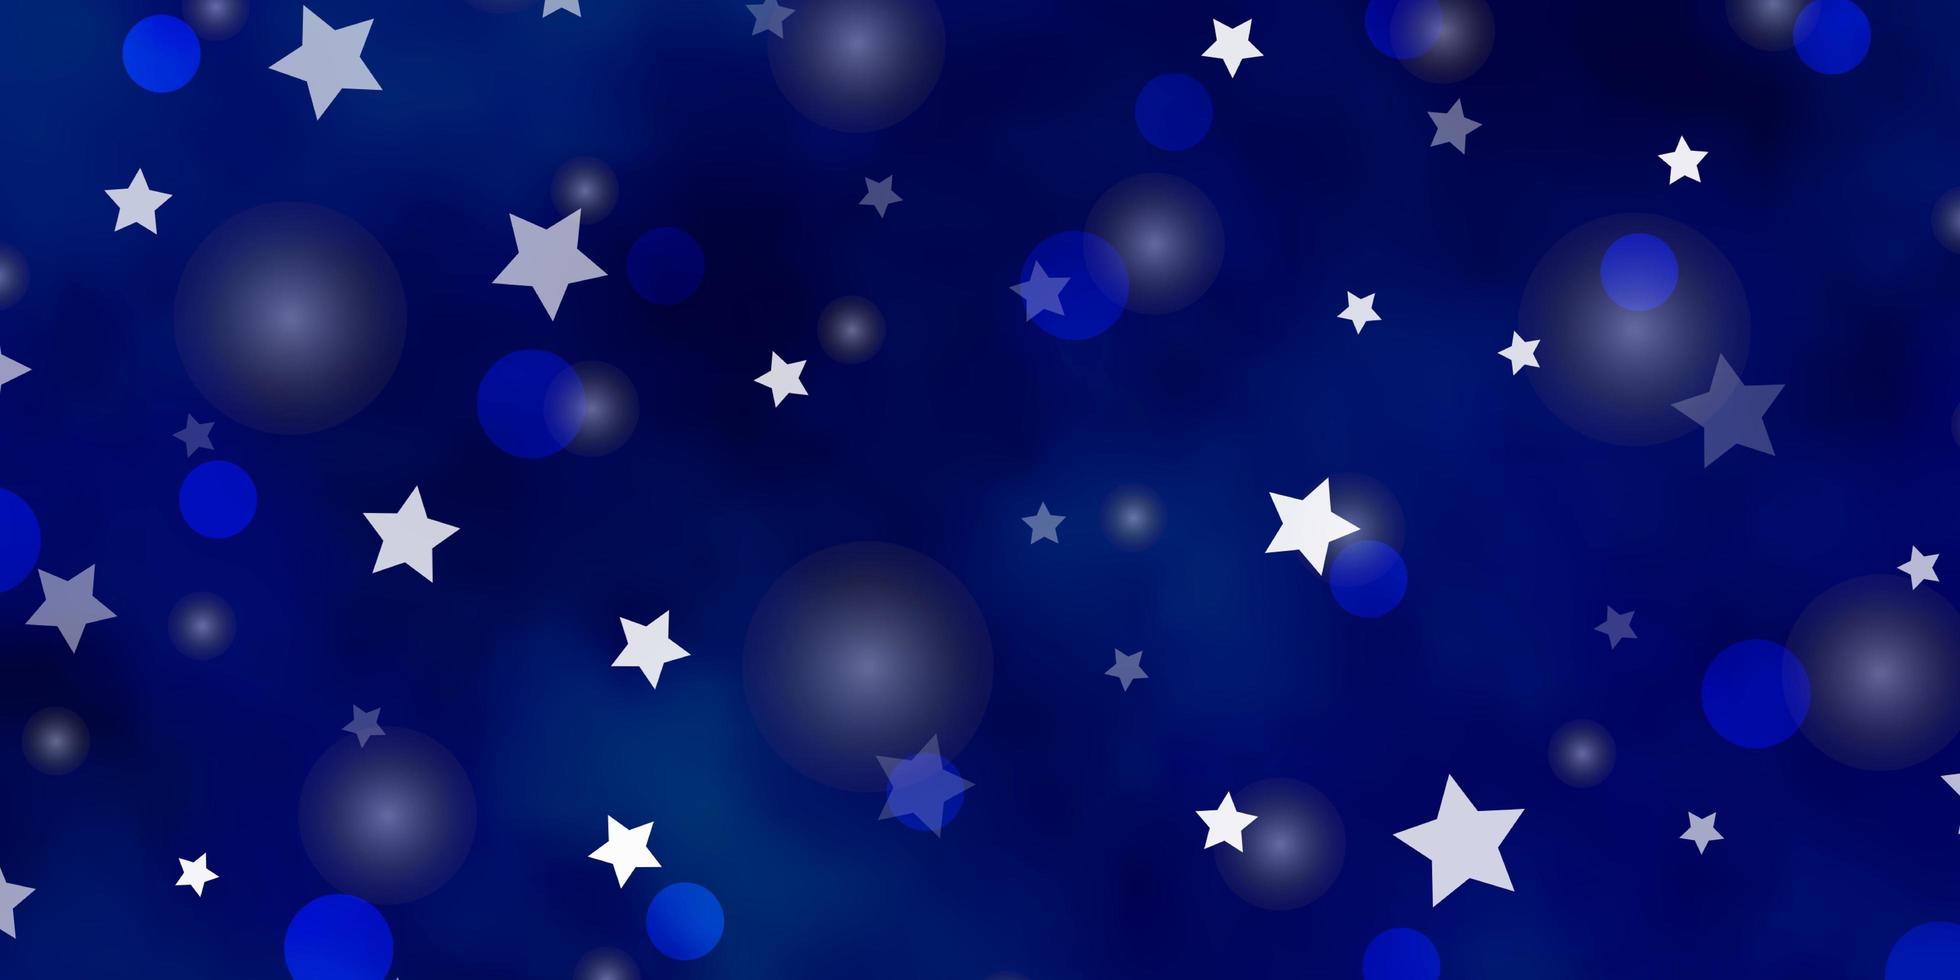 Light BLUE vector template with circles, stars.